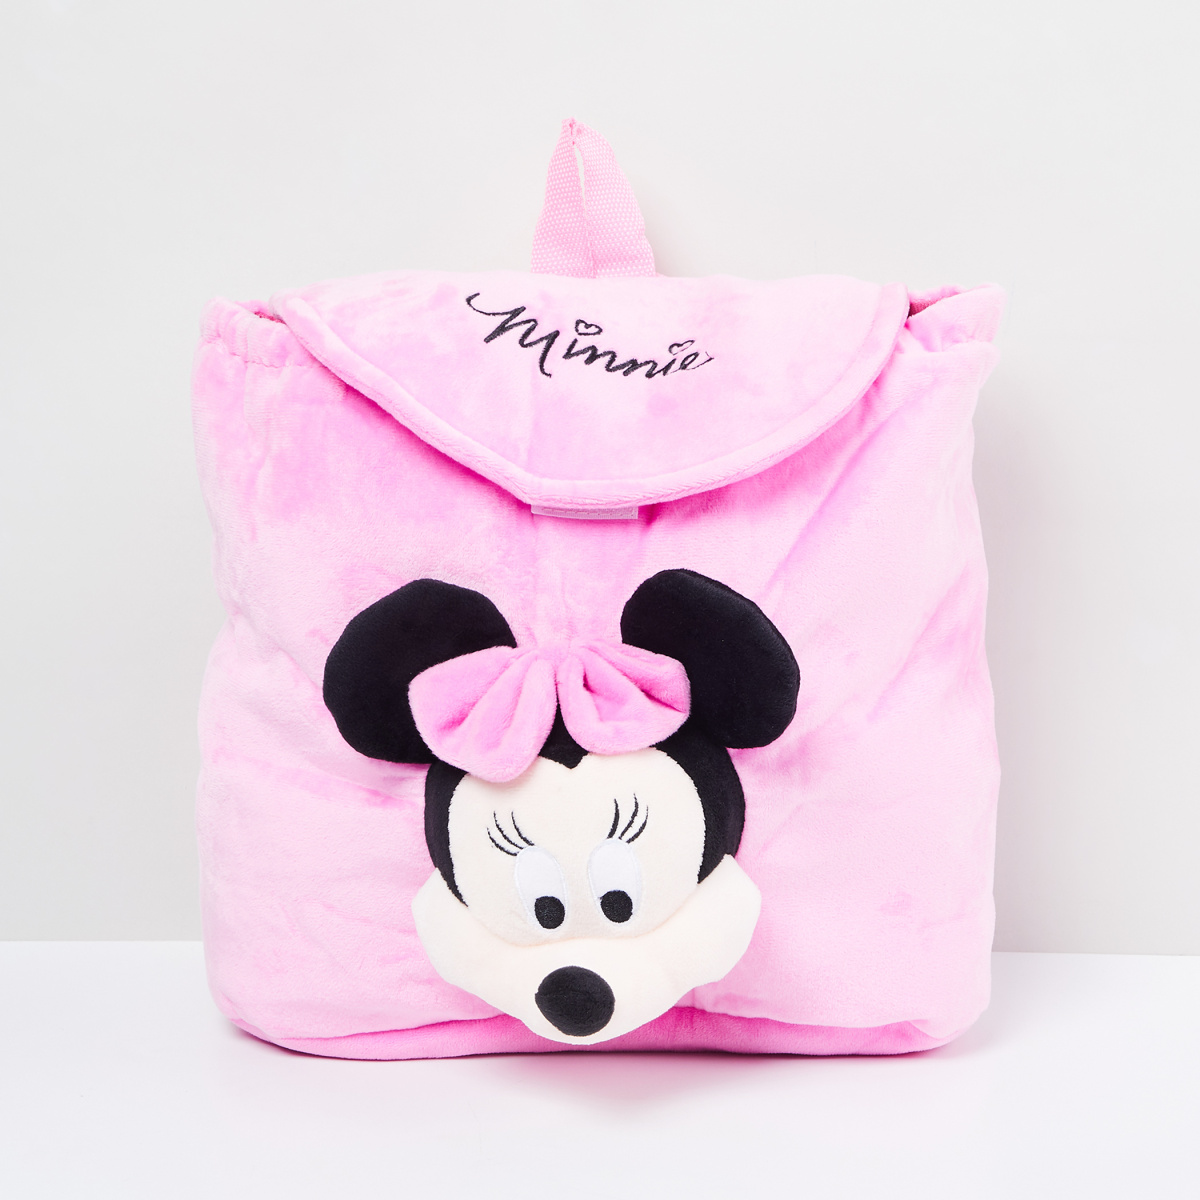 MAX Textured Backpack with Minnie Mouse Applique